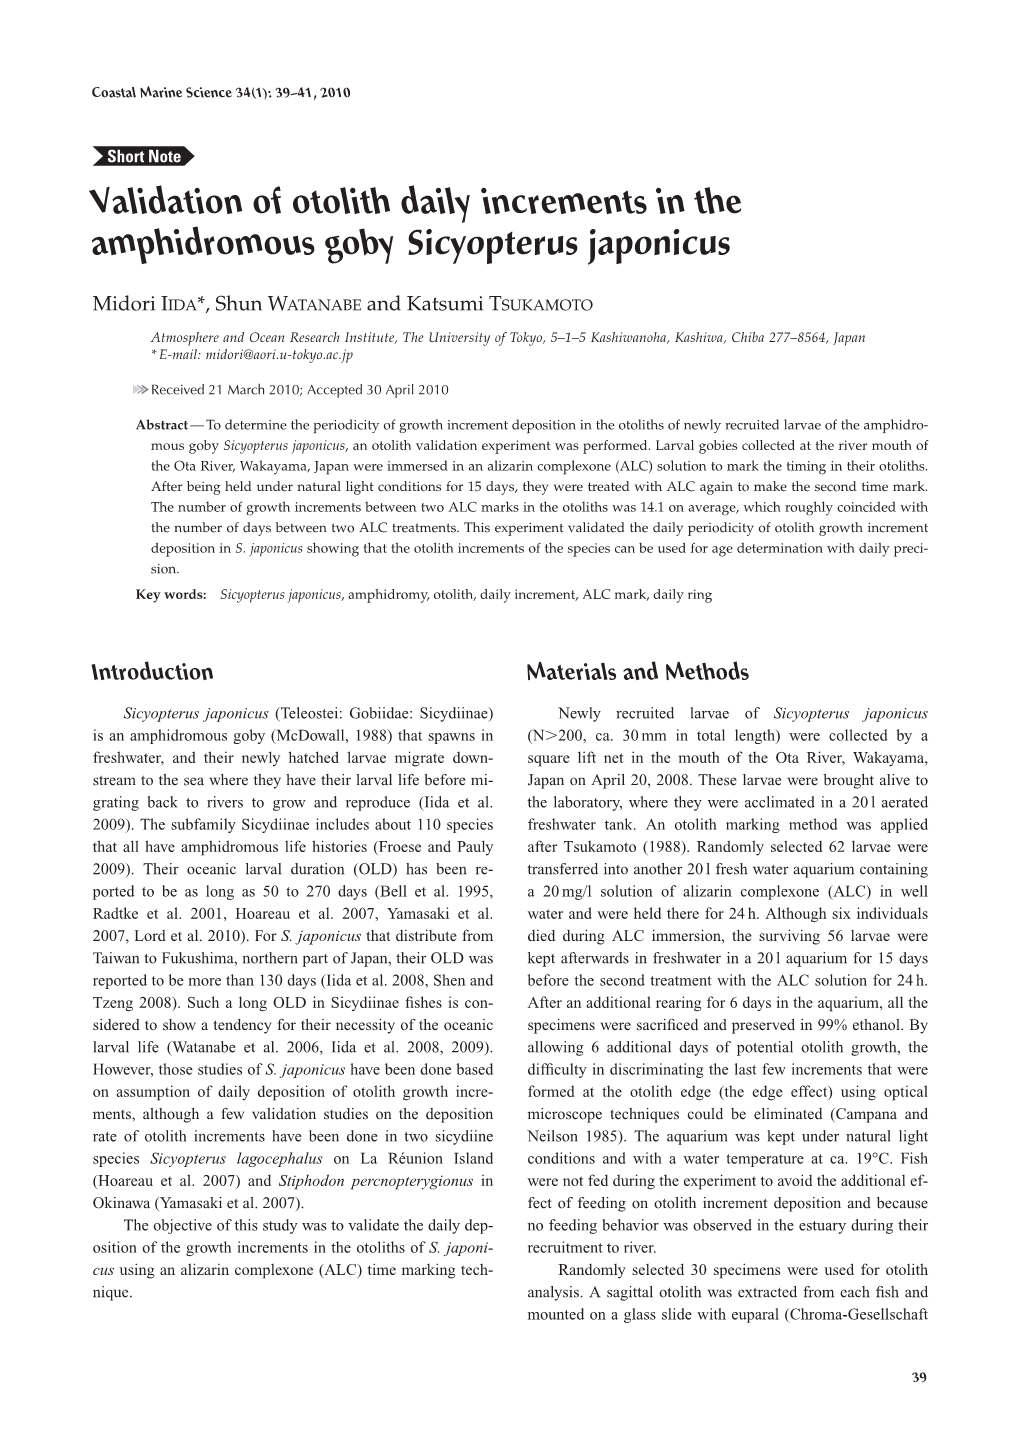 Validation of Otolith Daily Increments in the Amphidromous Goby Sicyopterus Japonicus